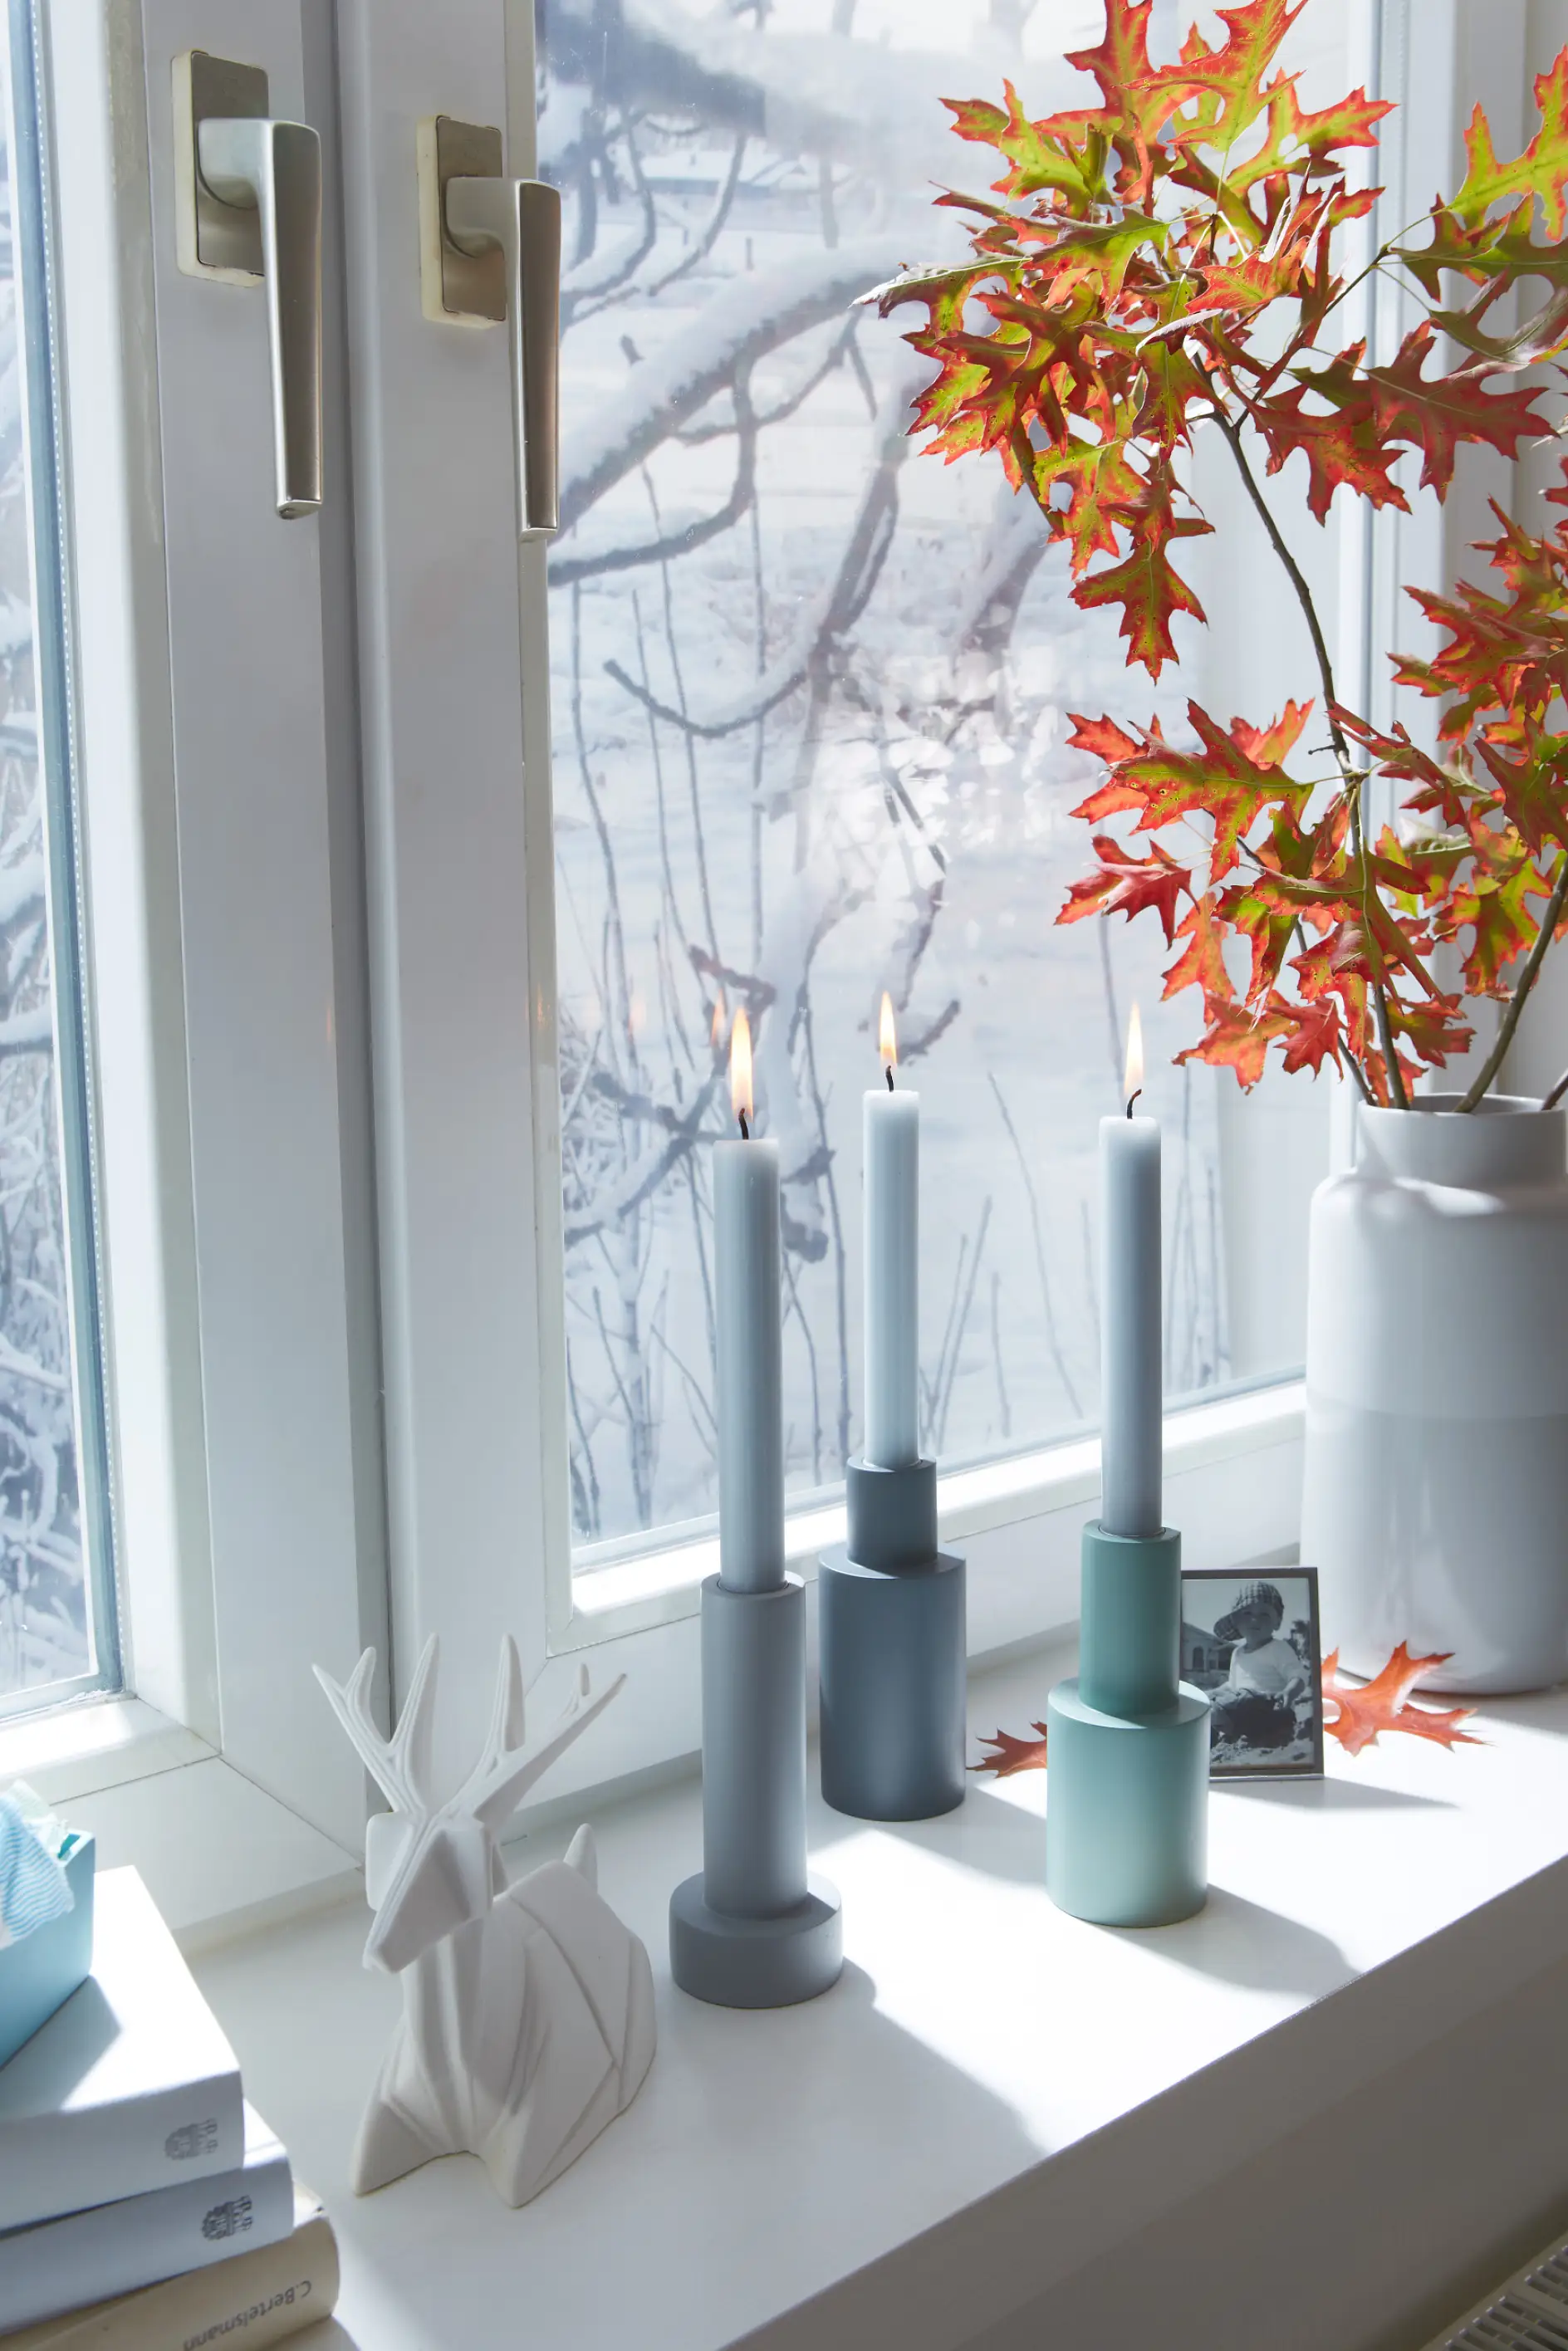 Candles in front of a insulated window in winter